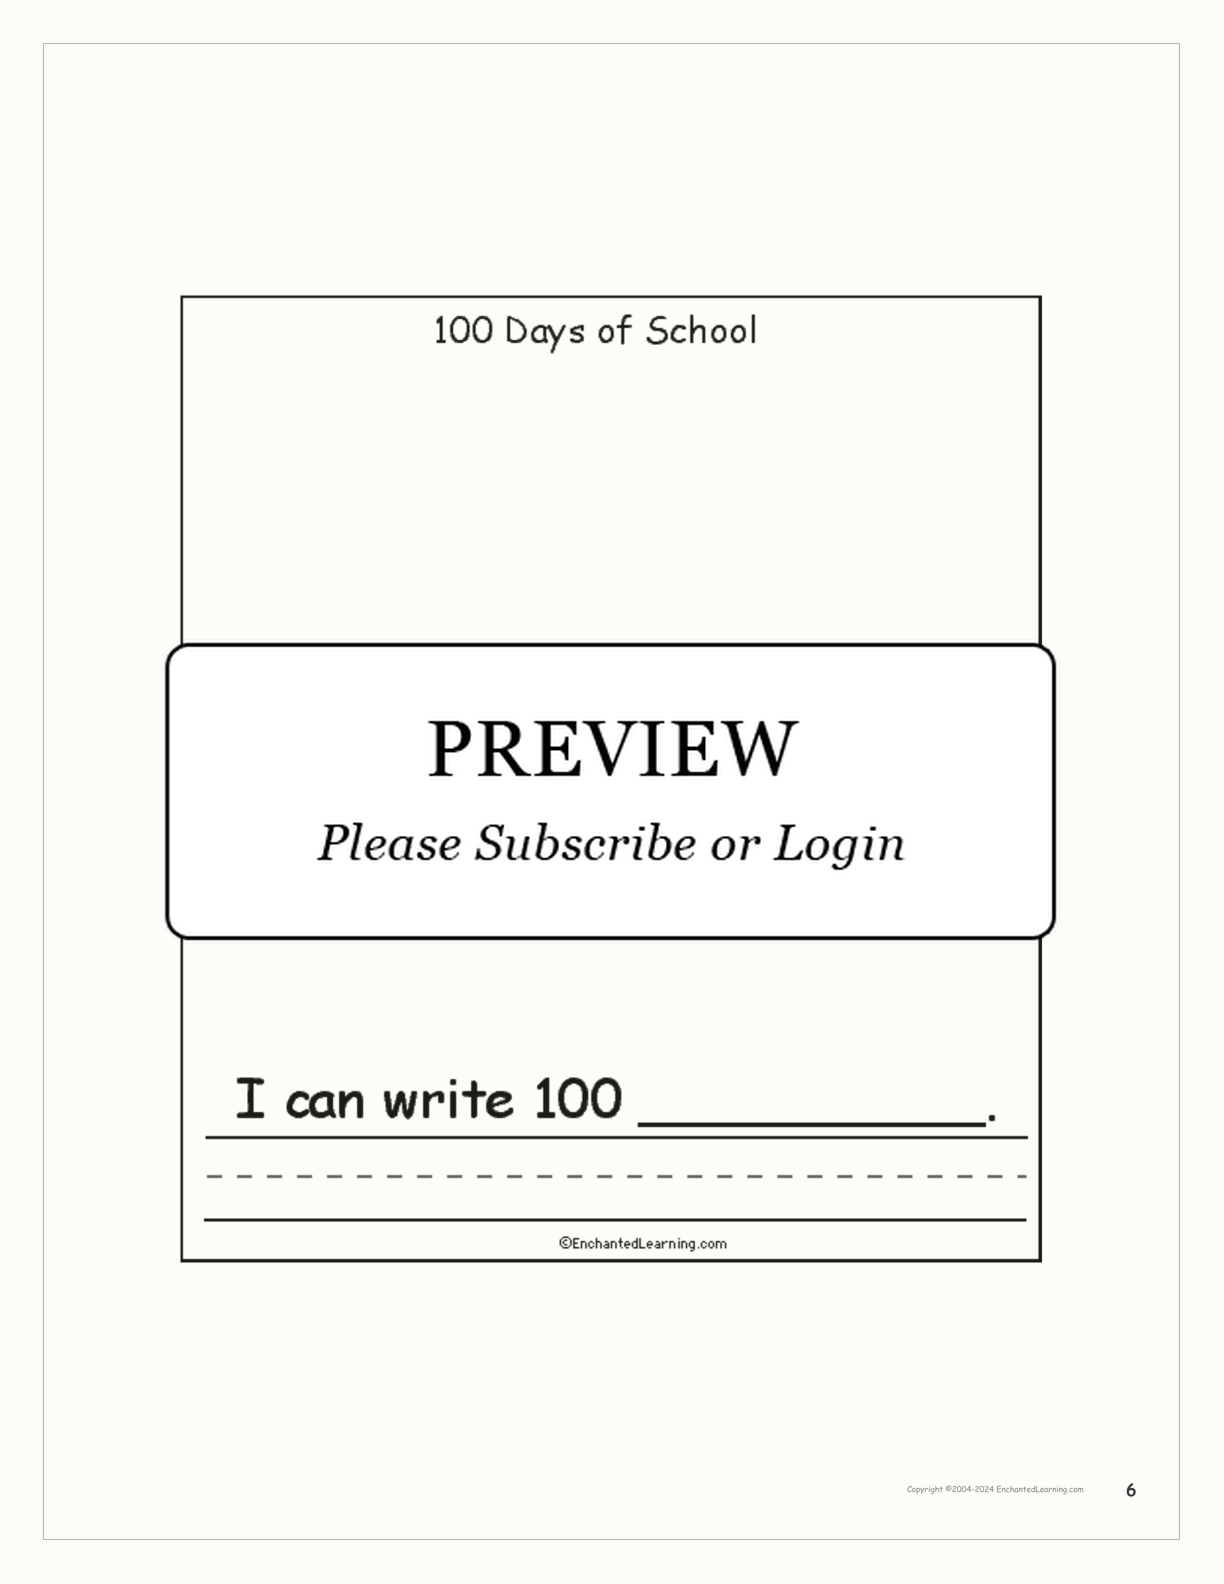 100 Days of School interactive worksheet page 6